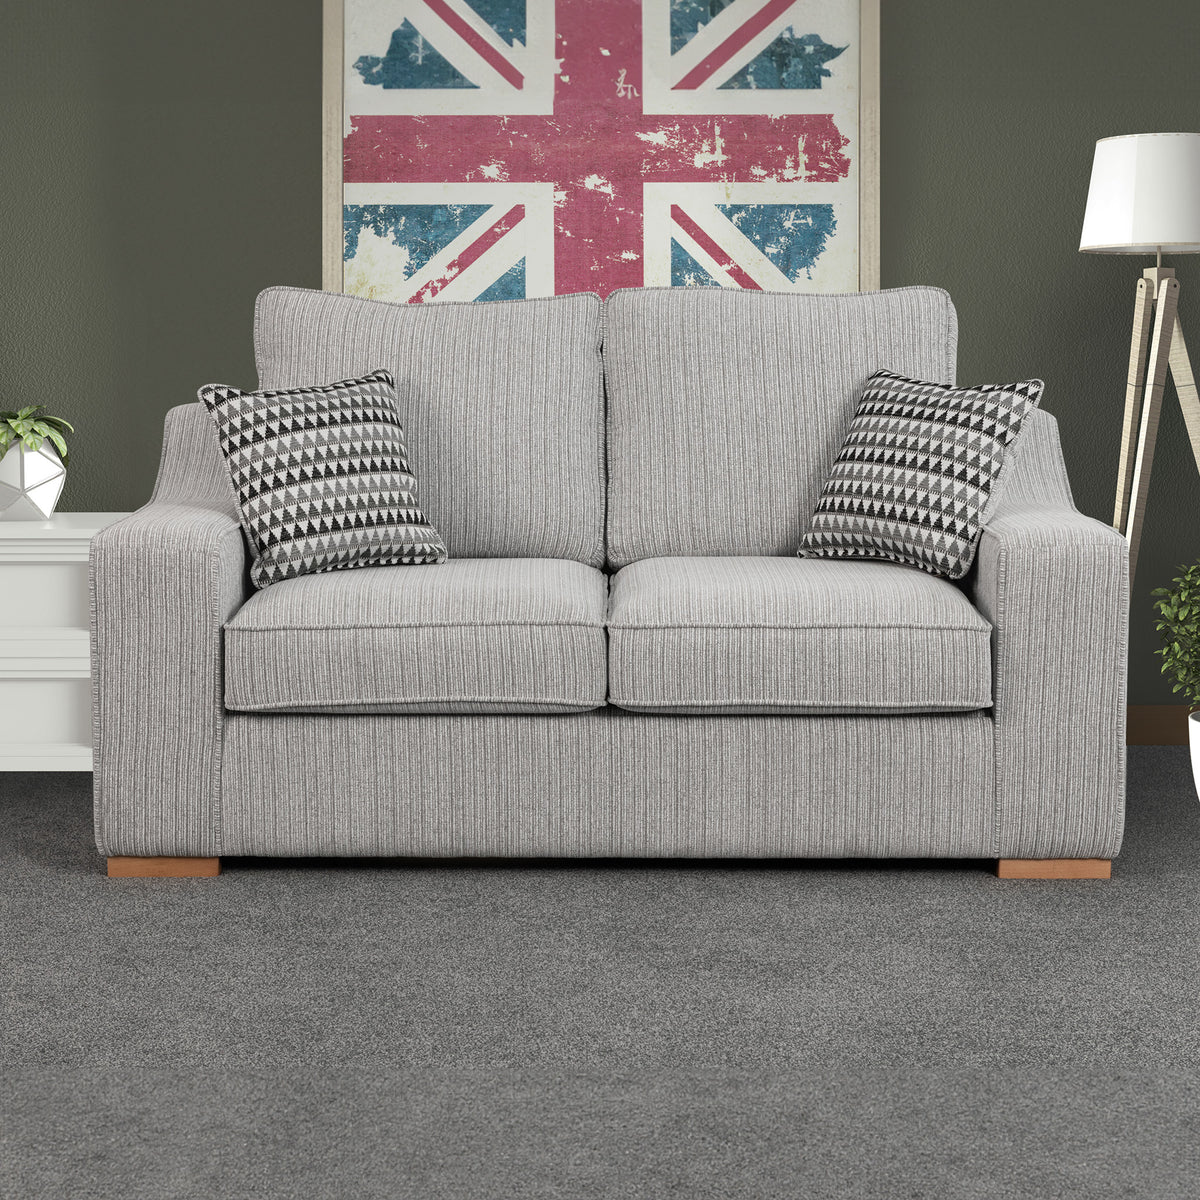 Ashow Silver 2 Seater Sofabed with Maika Dusk Scatter Cushions for living room